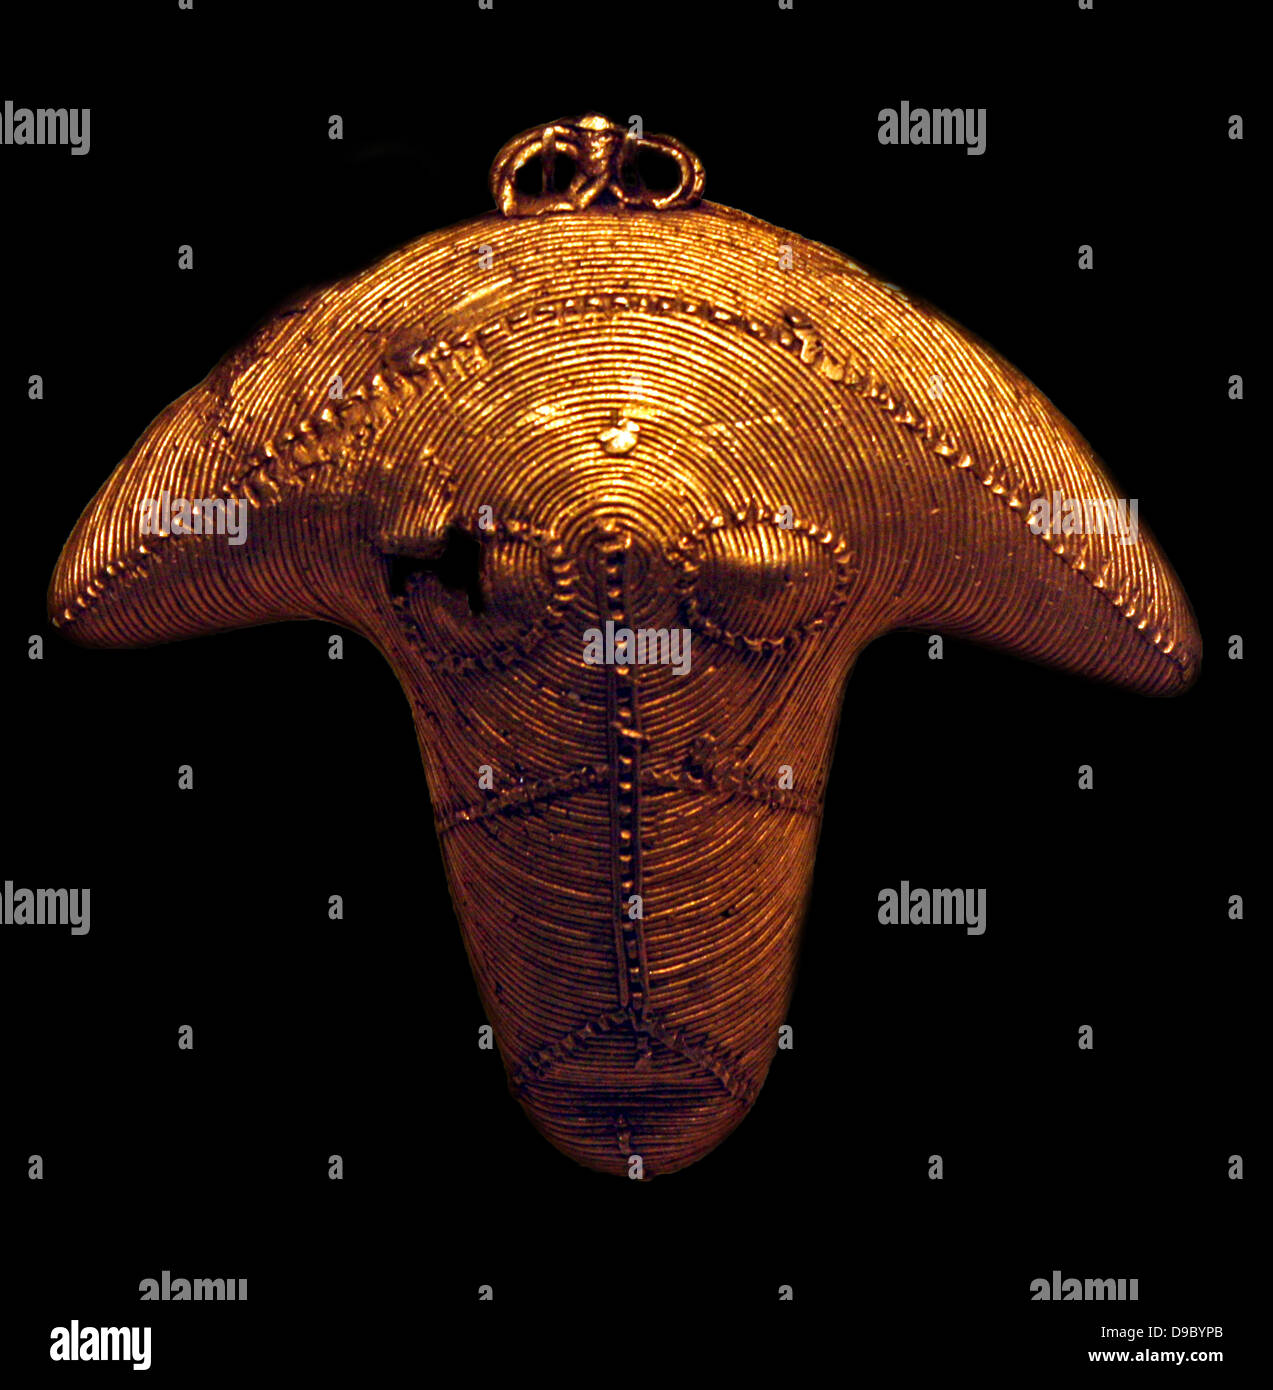 Ram's Head Ornament.  Cote d'Ivoire.  Lagoon peoples.  19th-20th century.  Gold. Stock Photo